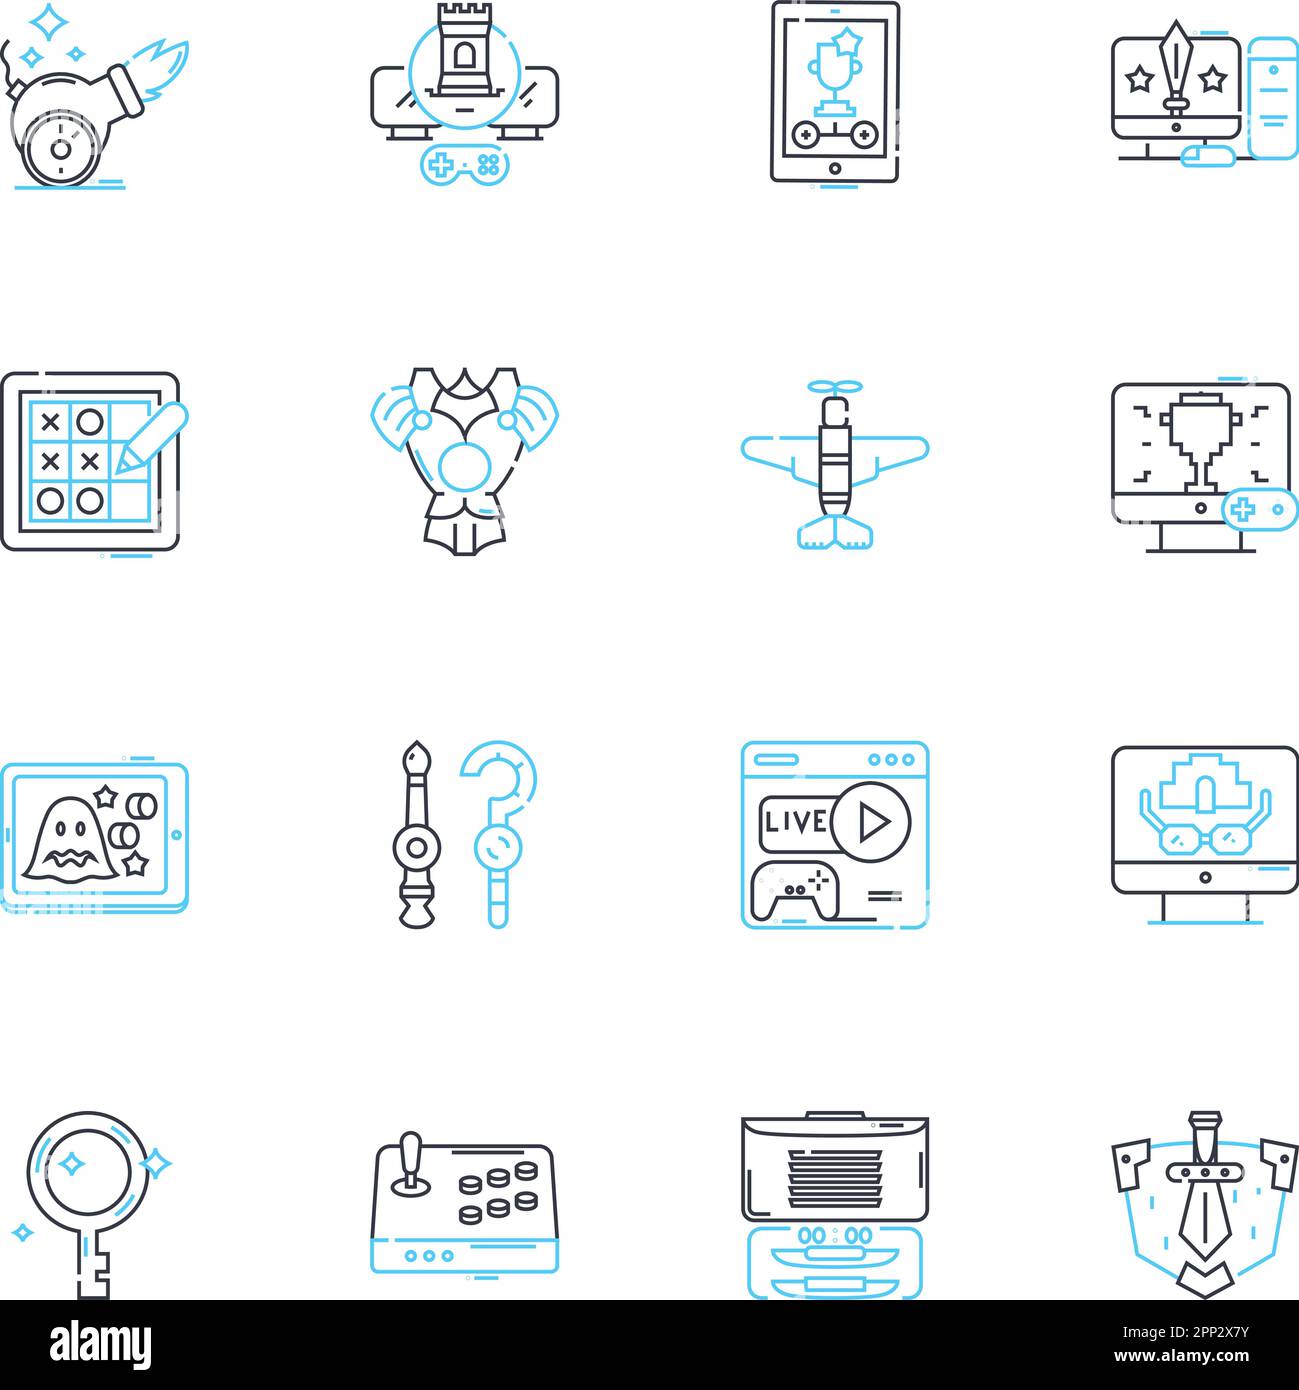 Reward system linear icons set. Incentives, Motivation, Recognition, Points, Bonuses, Loyalty, Achievements line vector and concept signs. Perks Stock Vector